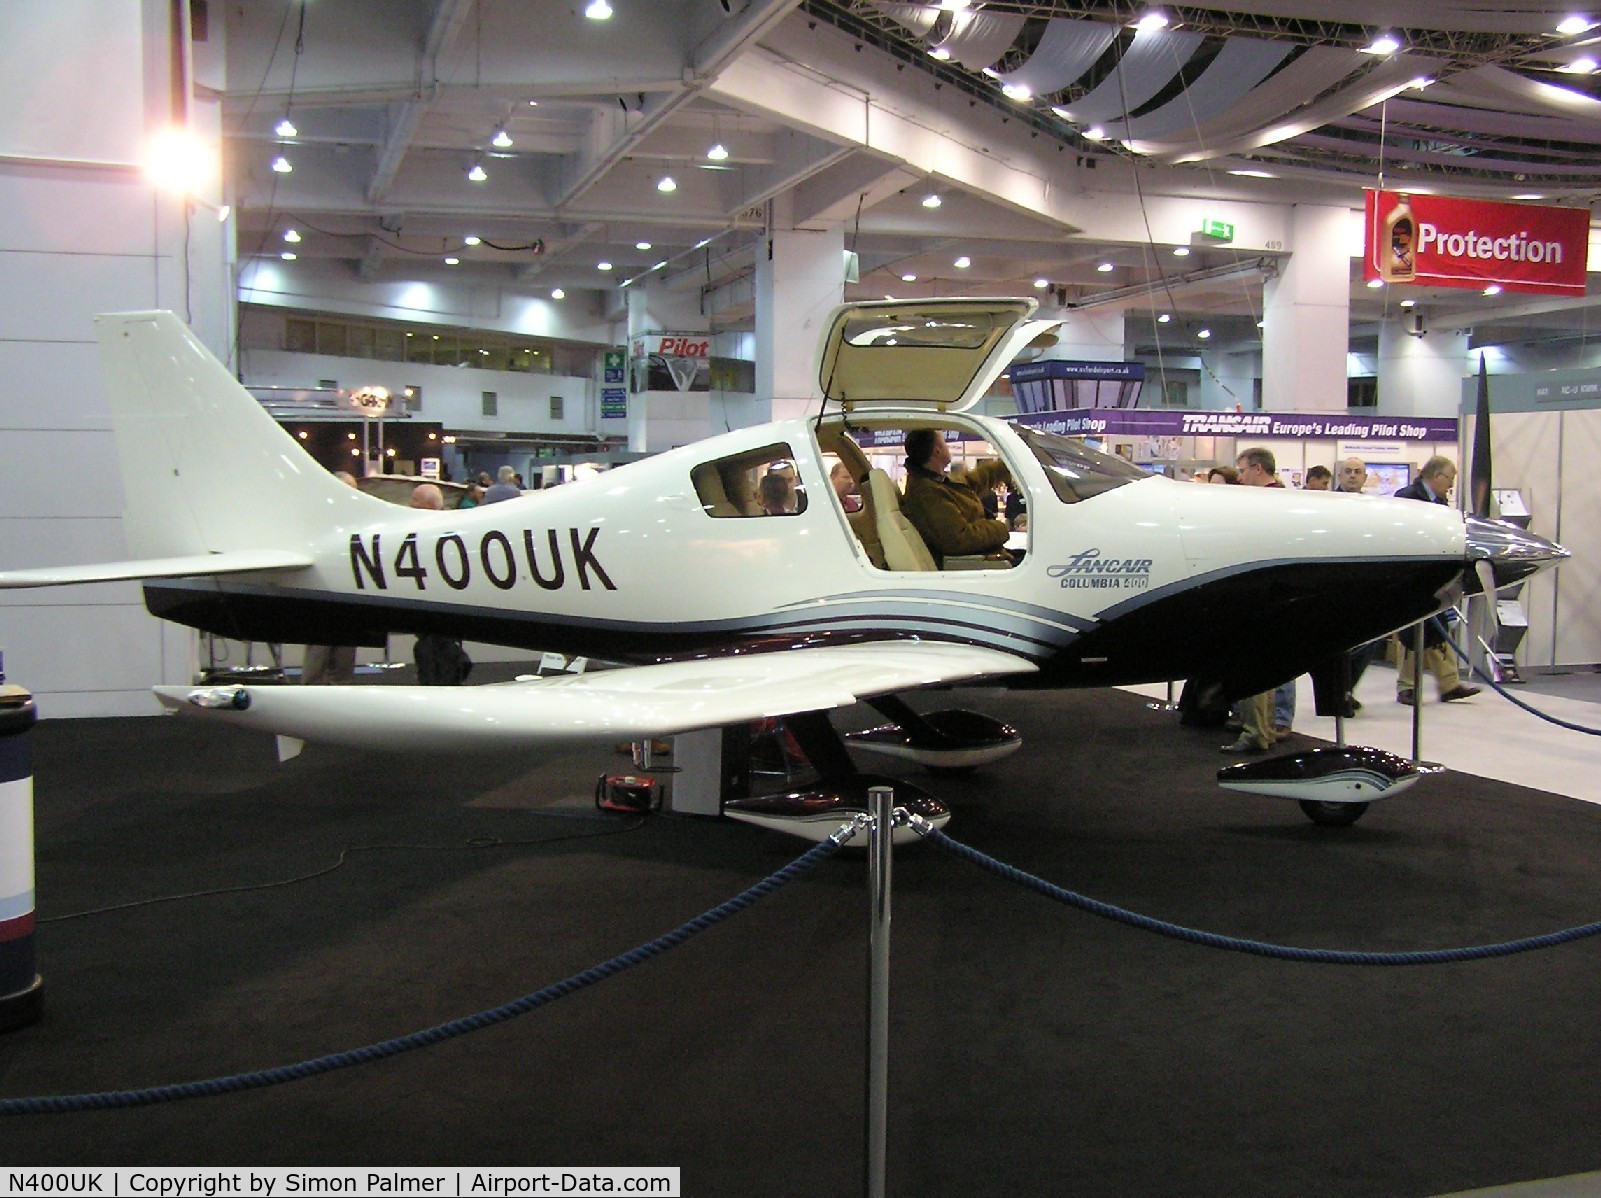 N400UK, 2005 Lancair LC41-550FG C/N 41062, Lancair exhibited at Earls Court in central London